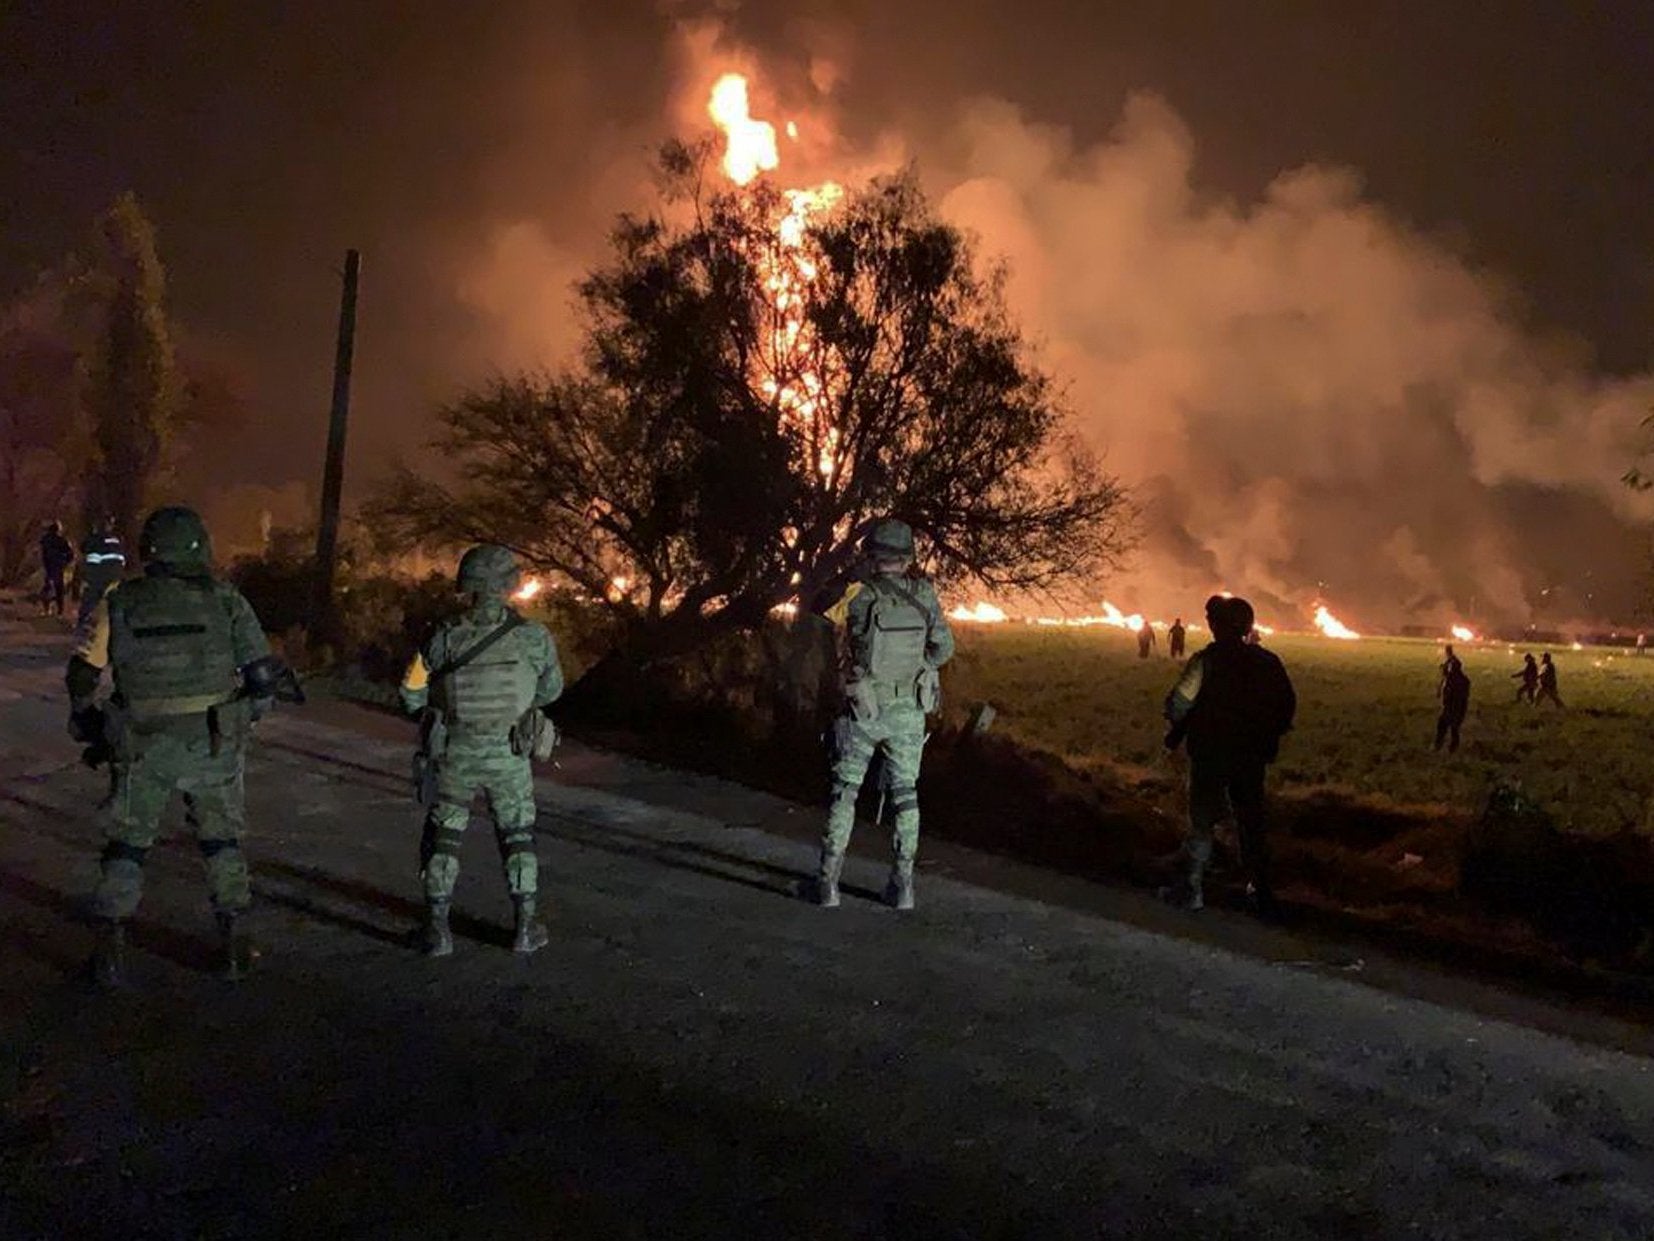 Mexico pipeline explosion kills at least 71 people